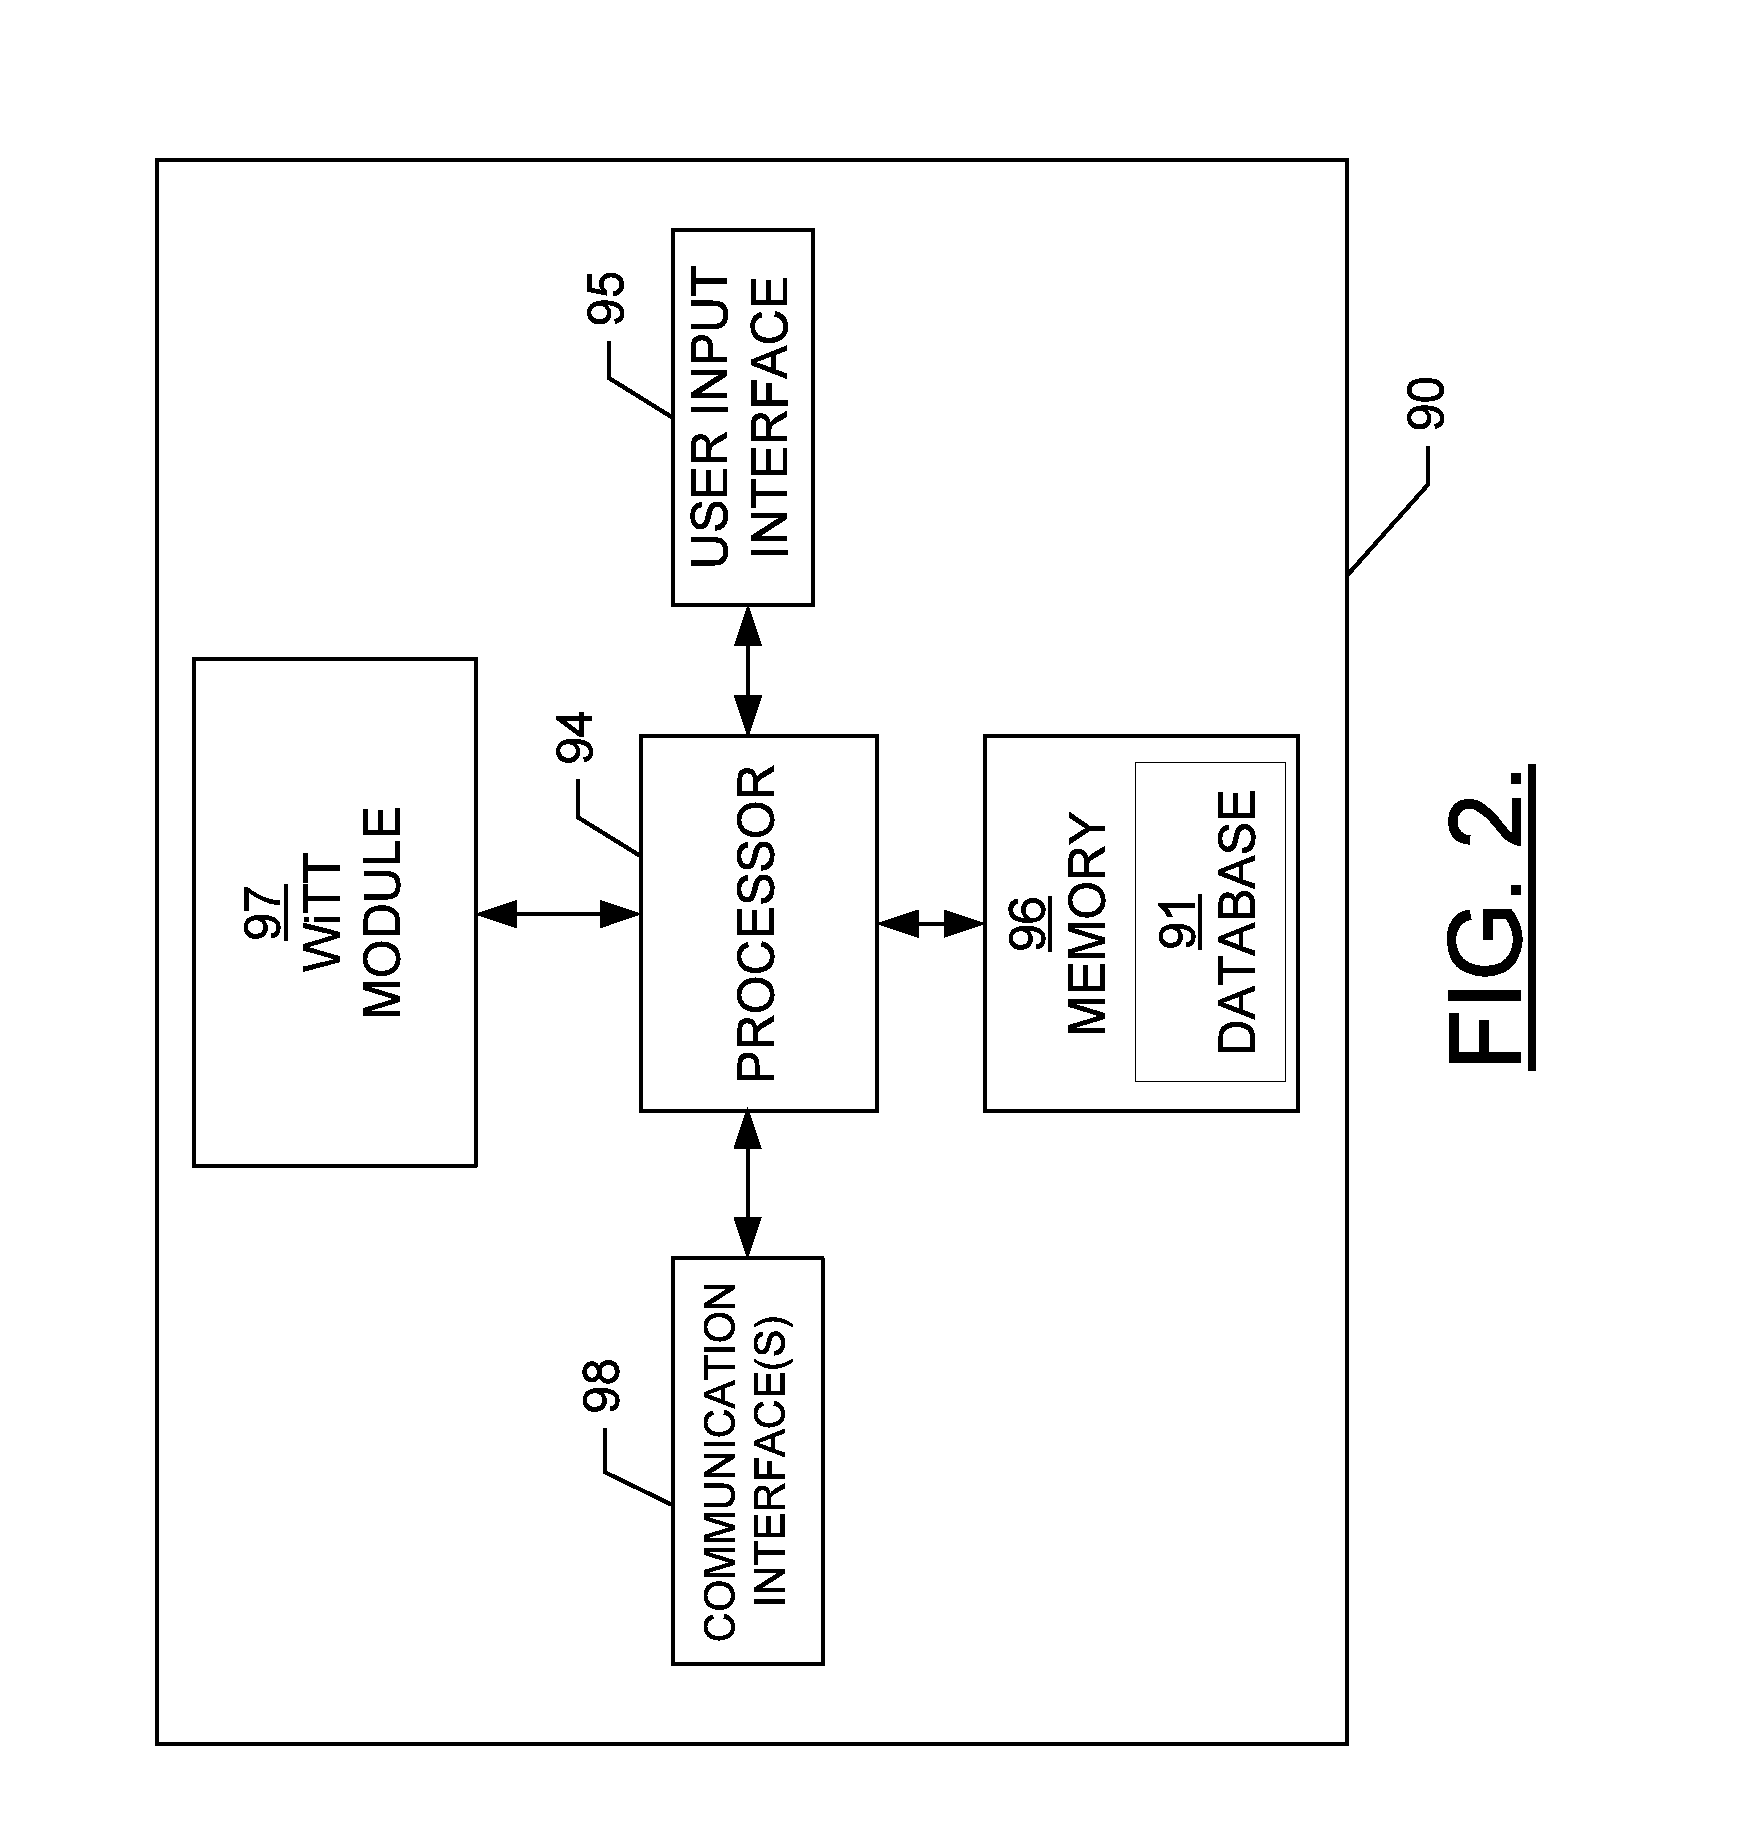 Methods, apparatuses and computer program products for securing communications